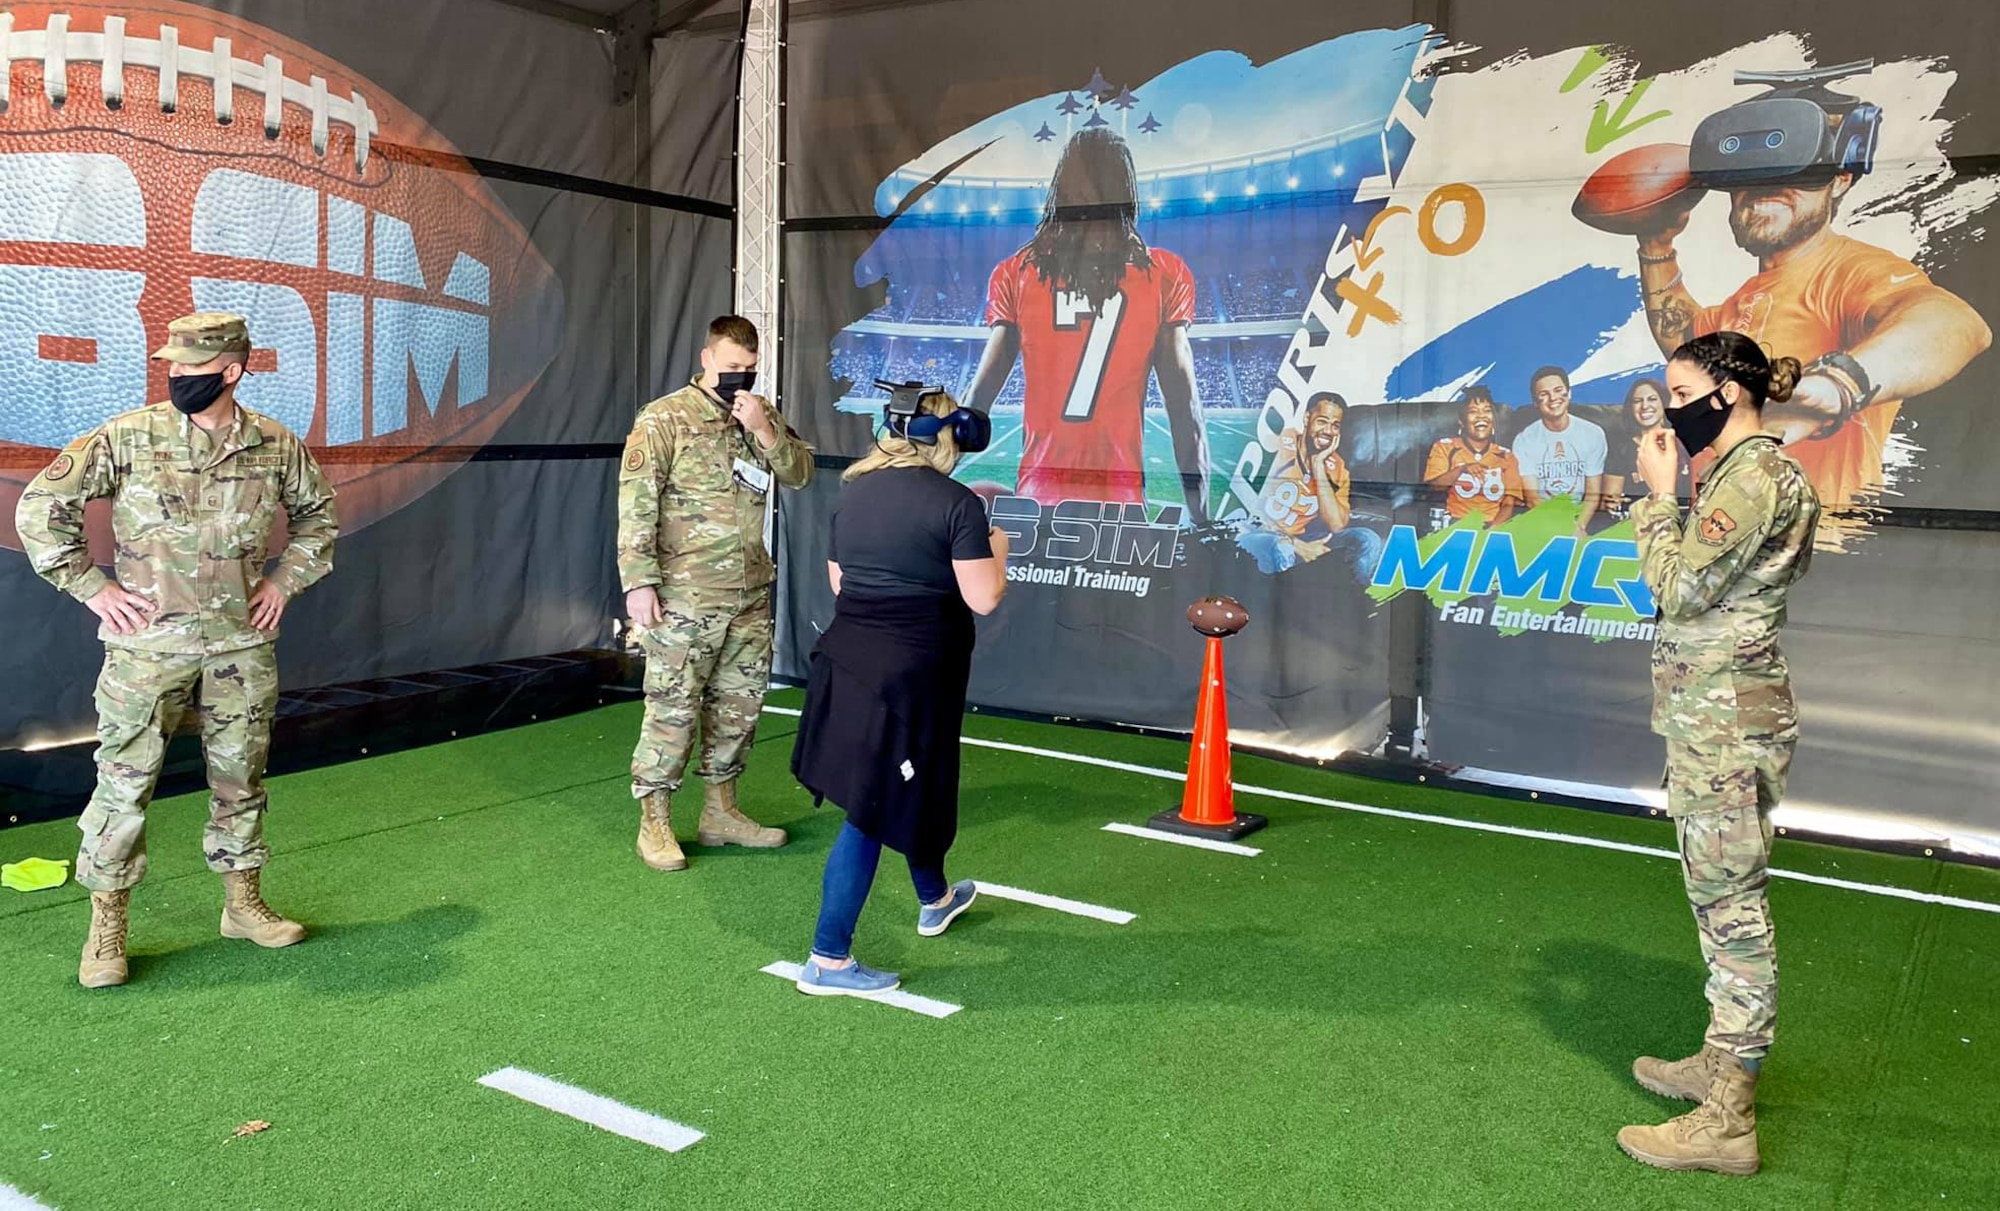 Total Force recruiters assisted a fan with the AIR RAID QB SIM Experience at the Super Bowl LV Experience outside of Raymond James Stadium in Tampa, Florida, Jan. 31, 2021. Air Force recruiters deployed the AIR RAID QB SIM Experience as part of their recruiting efforts. This virtual reality and sensor technology is used to train quarterbacks at both the college and pro level. In the experience, visitors are playing against an Air Force defense and the stadium featured Raymond James Stadium. (Courtesy photo)